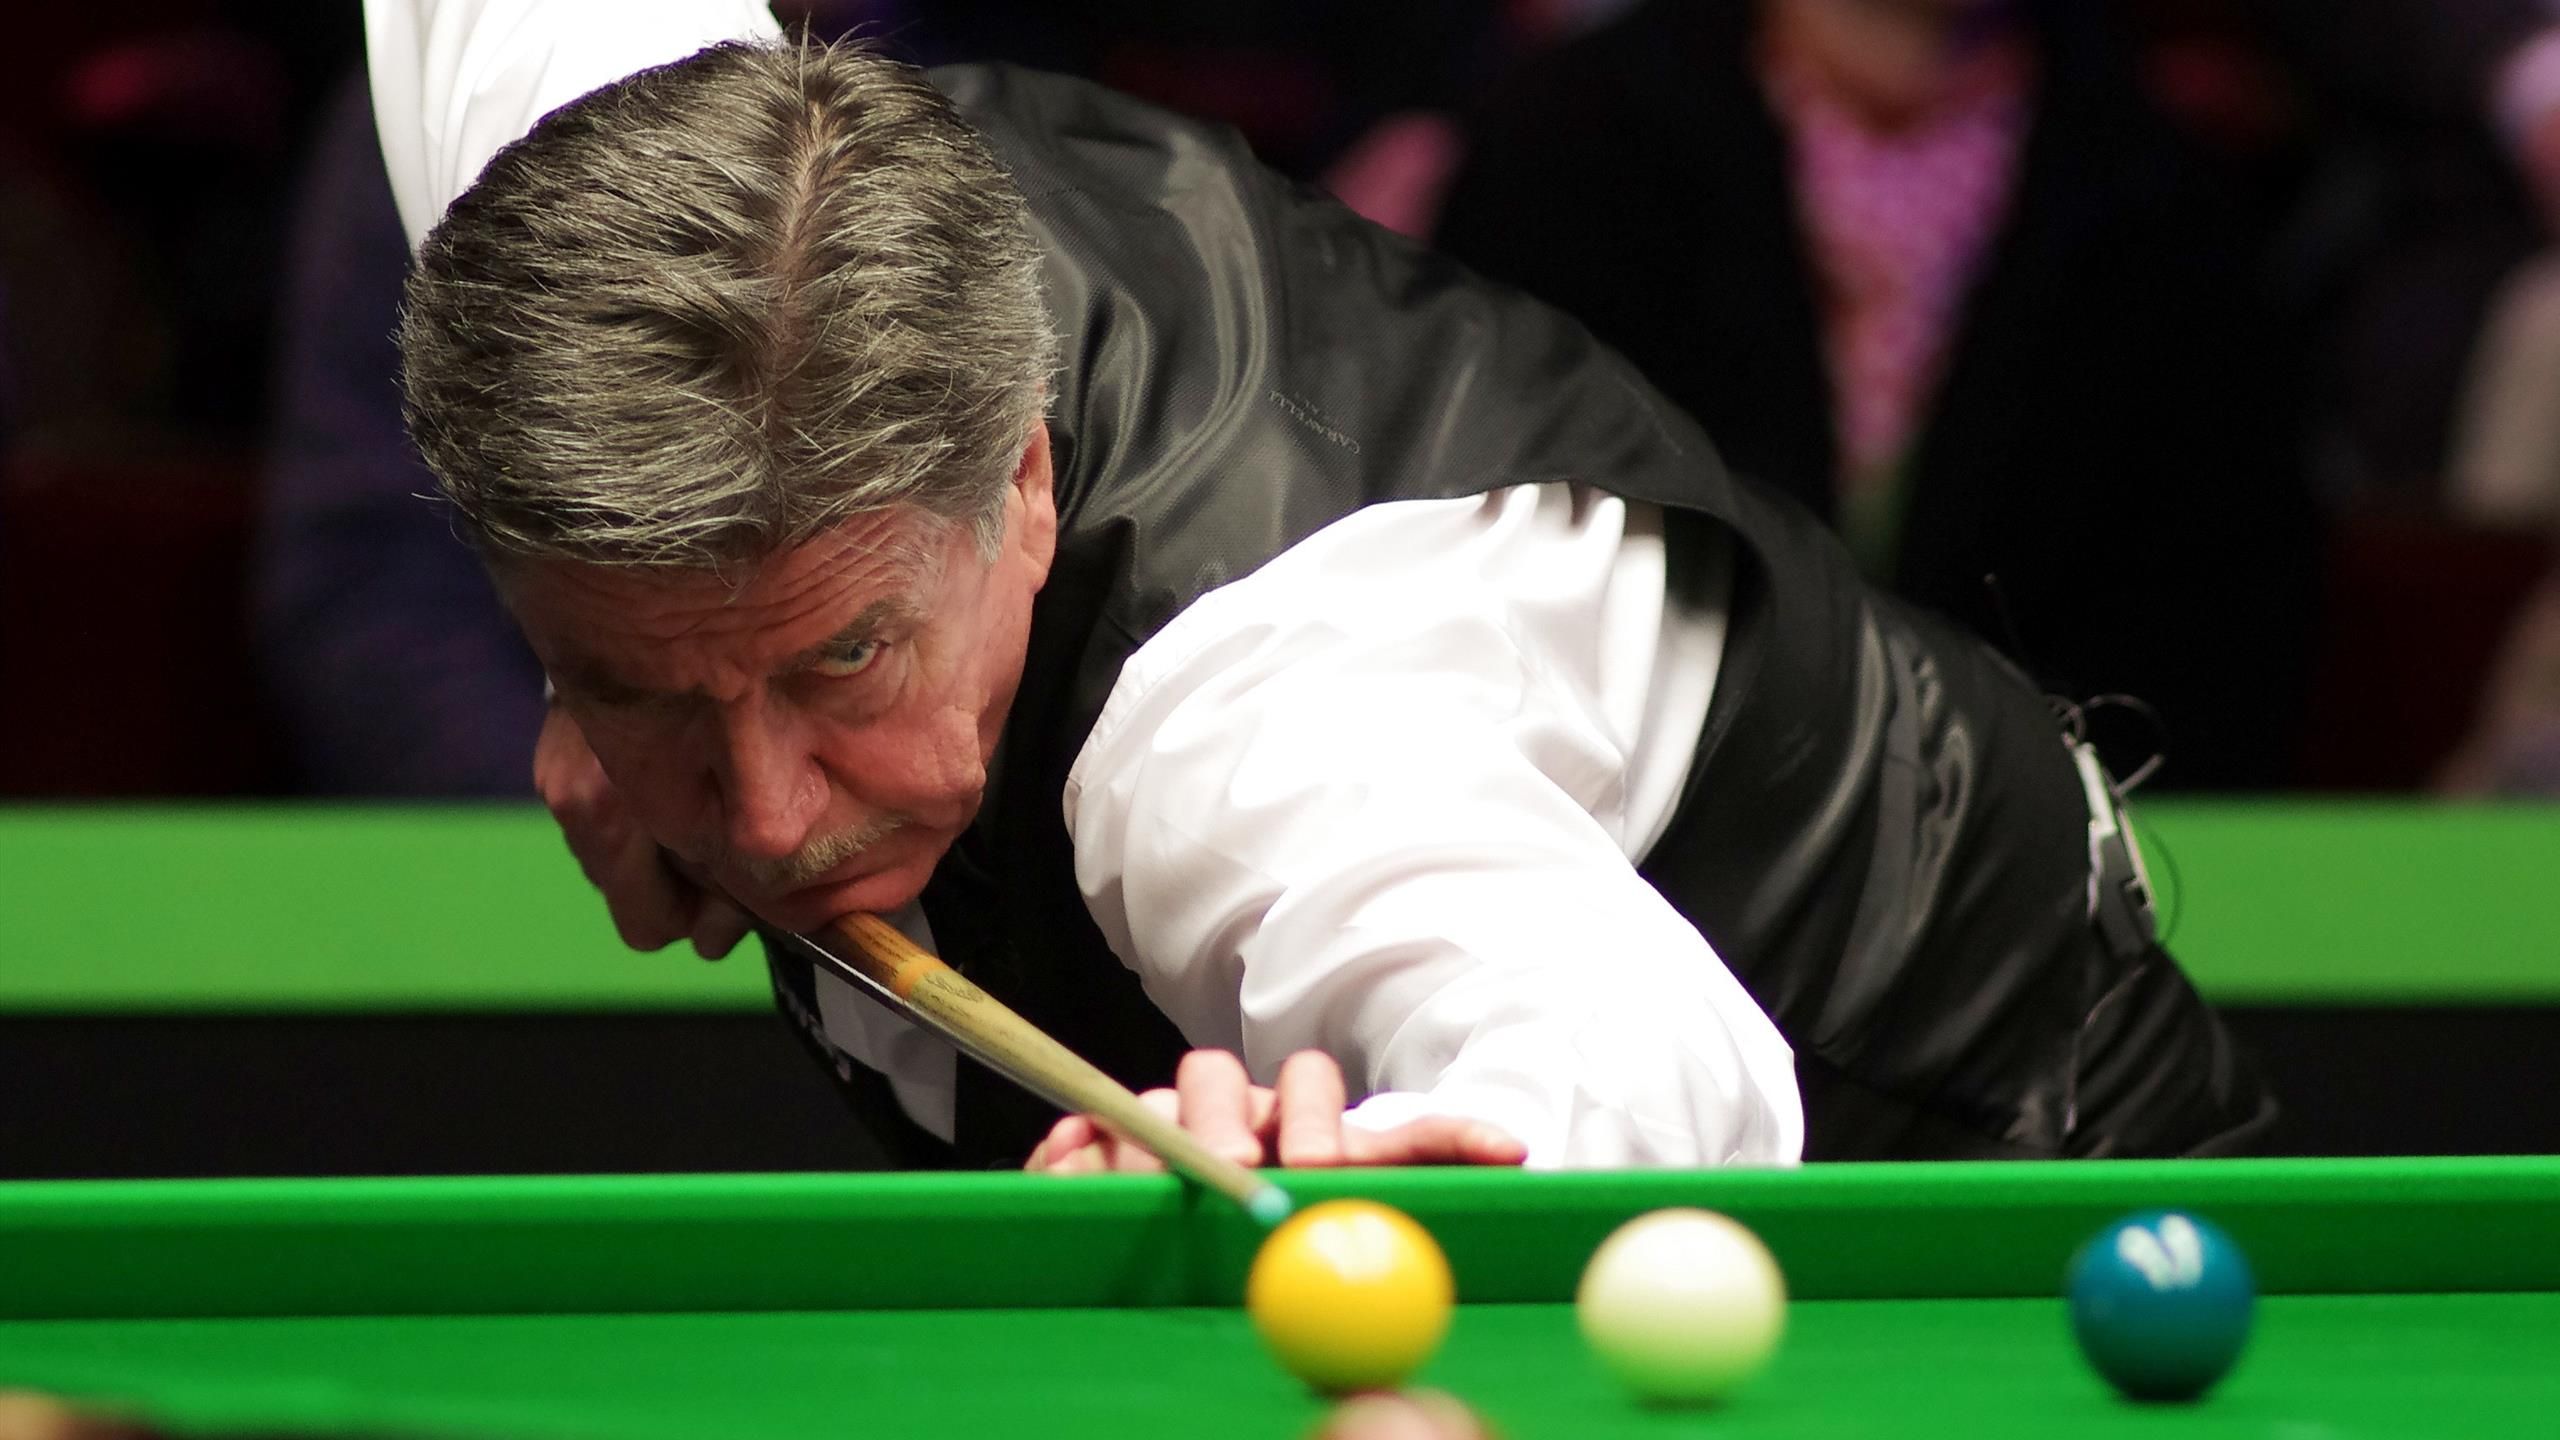 Cliff Thorburn, 73, retires from competitive snooker after defeat to Kuldesh Johal at UK Seniors Championship